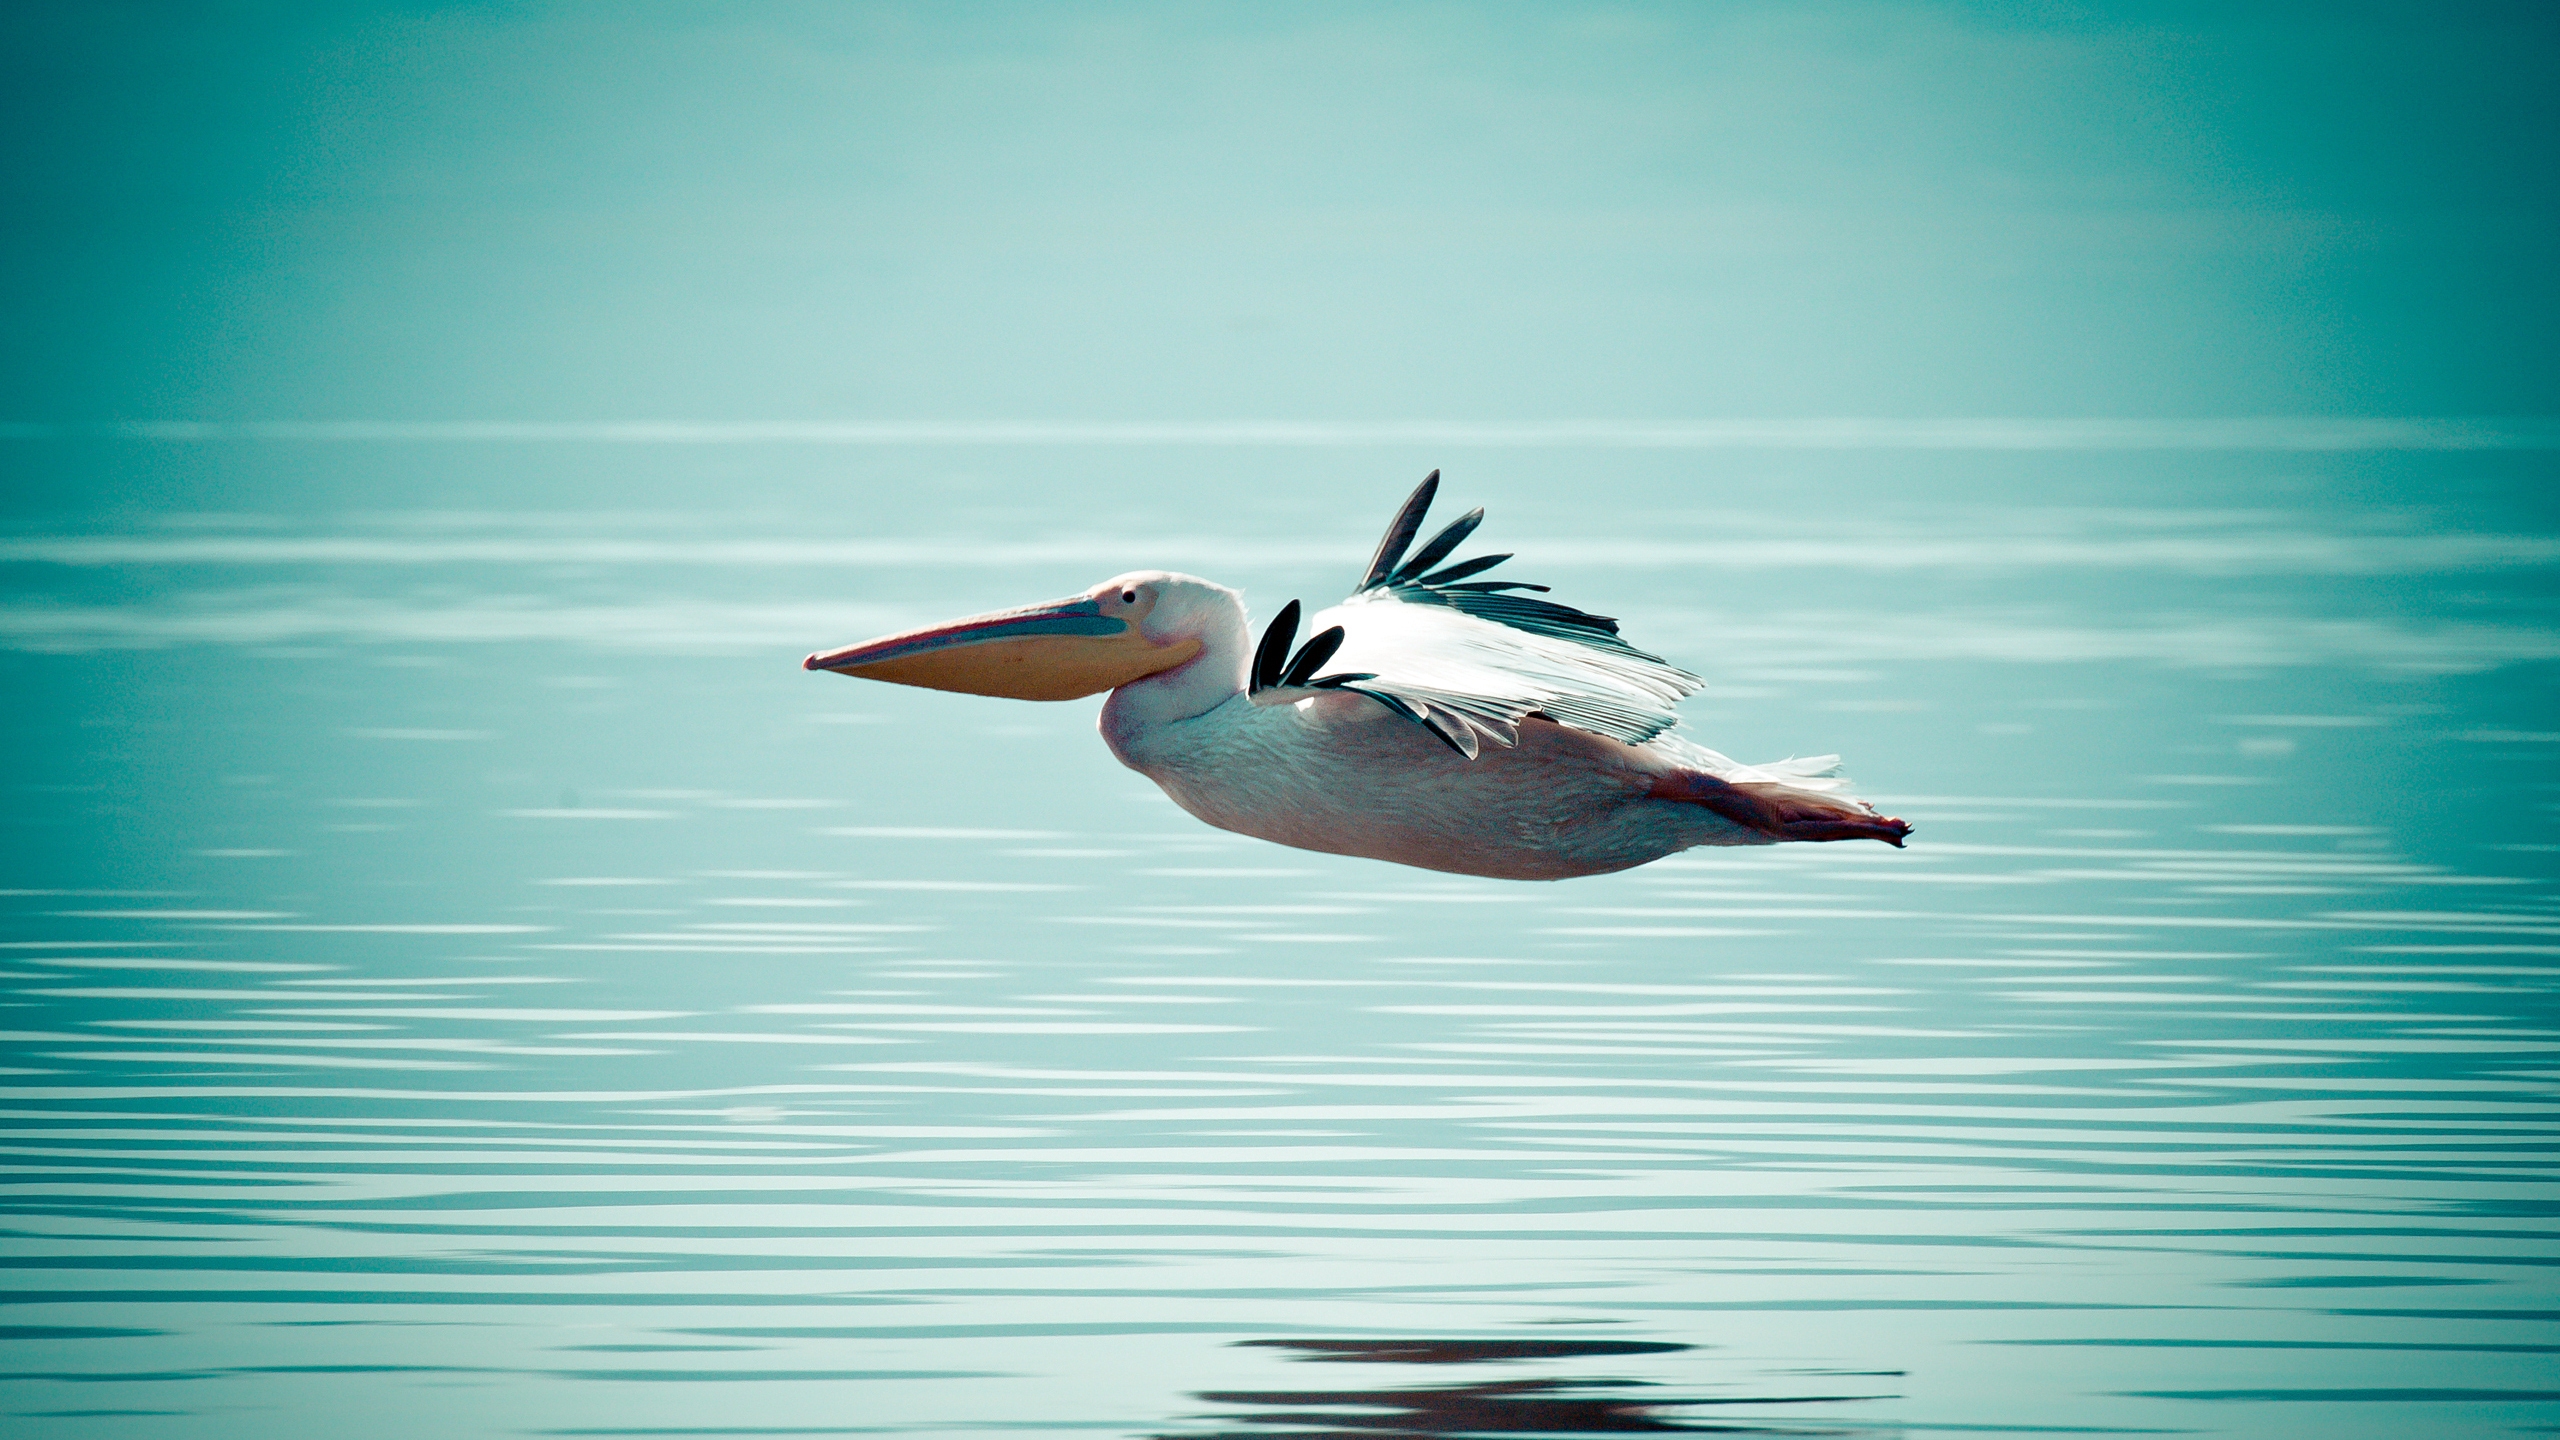 Pelican Flying Over Water for 2560x1440 HDTV resolution